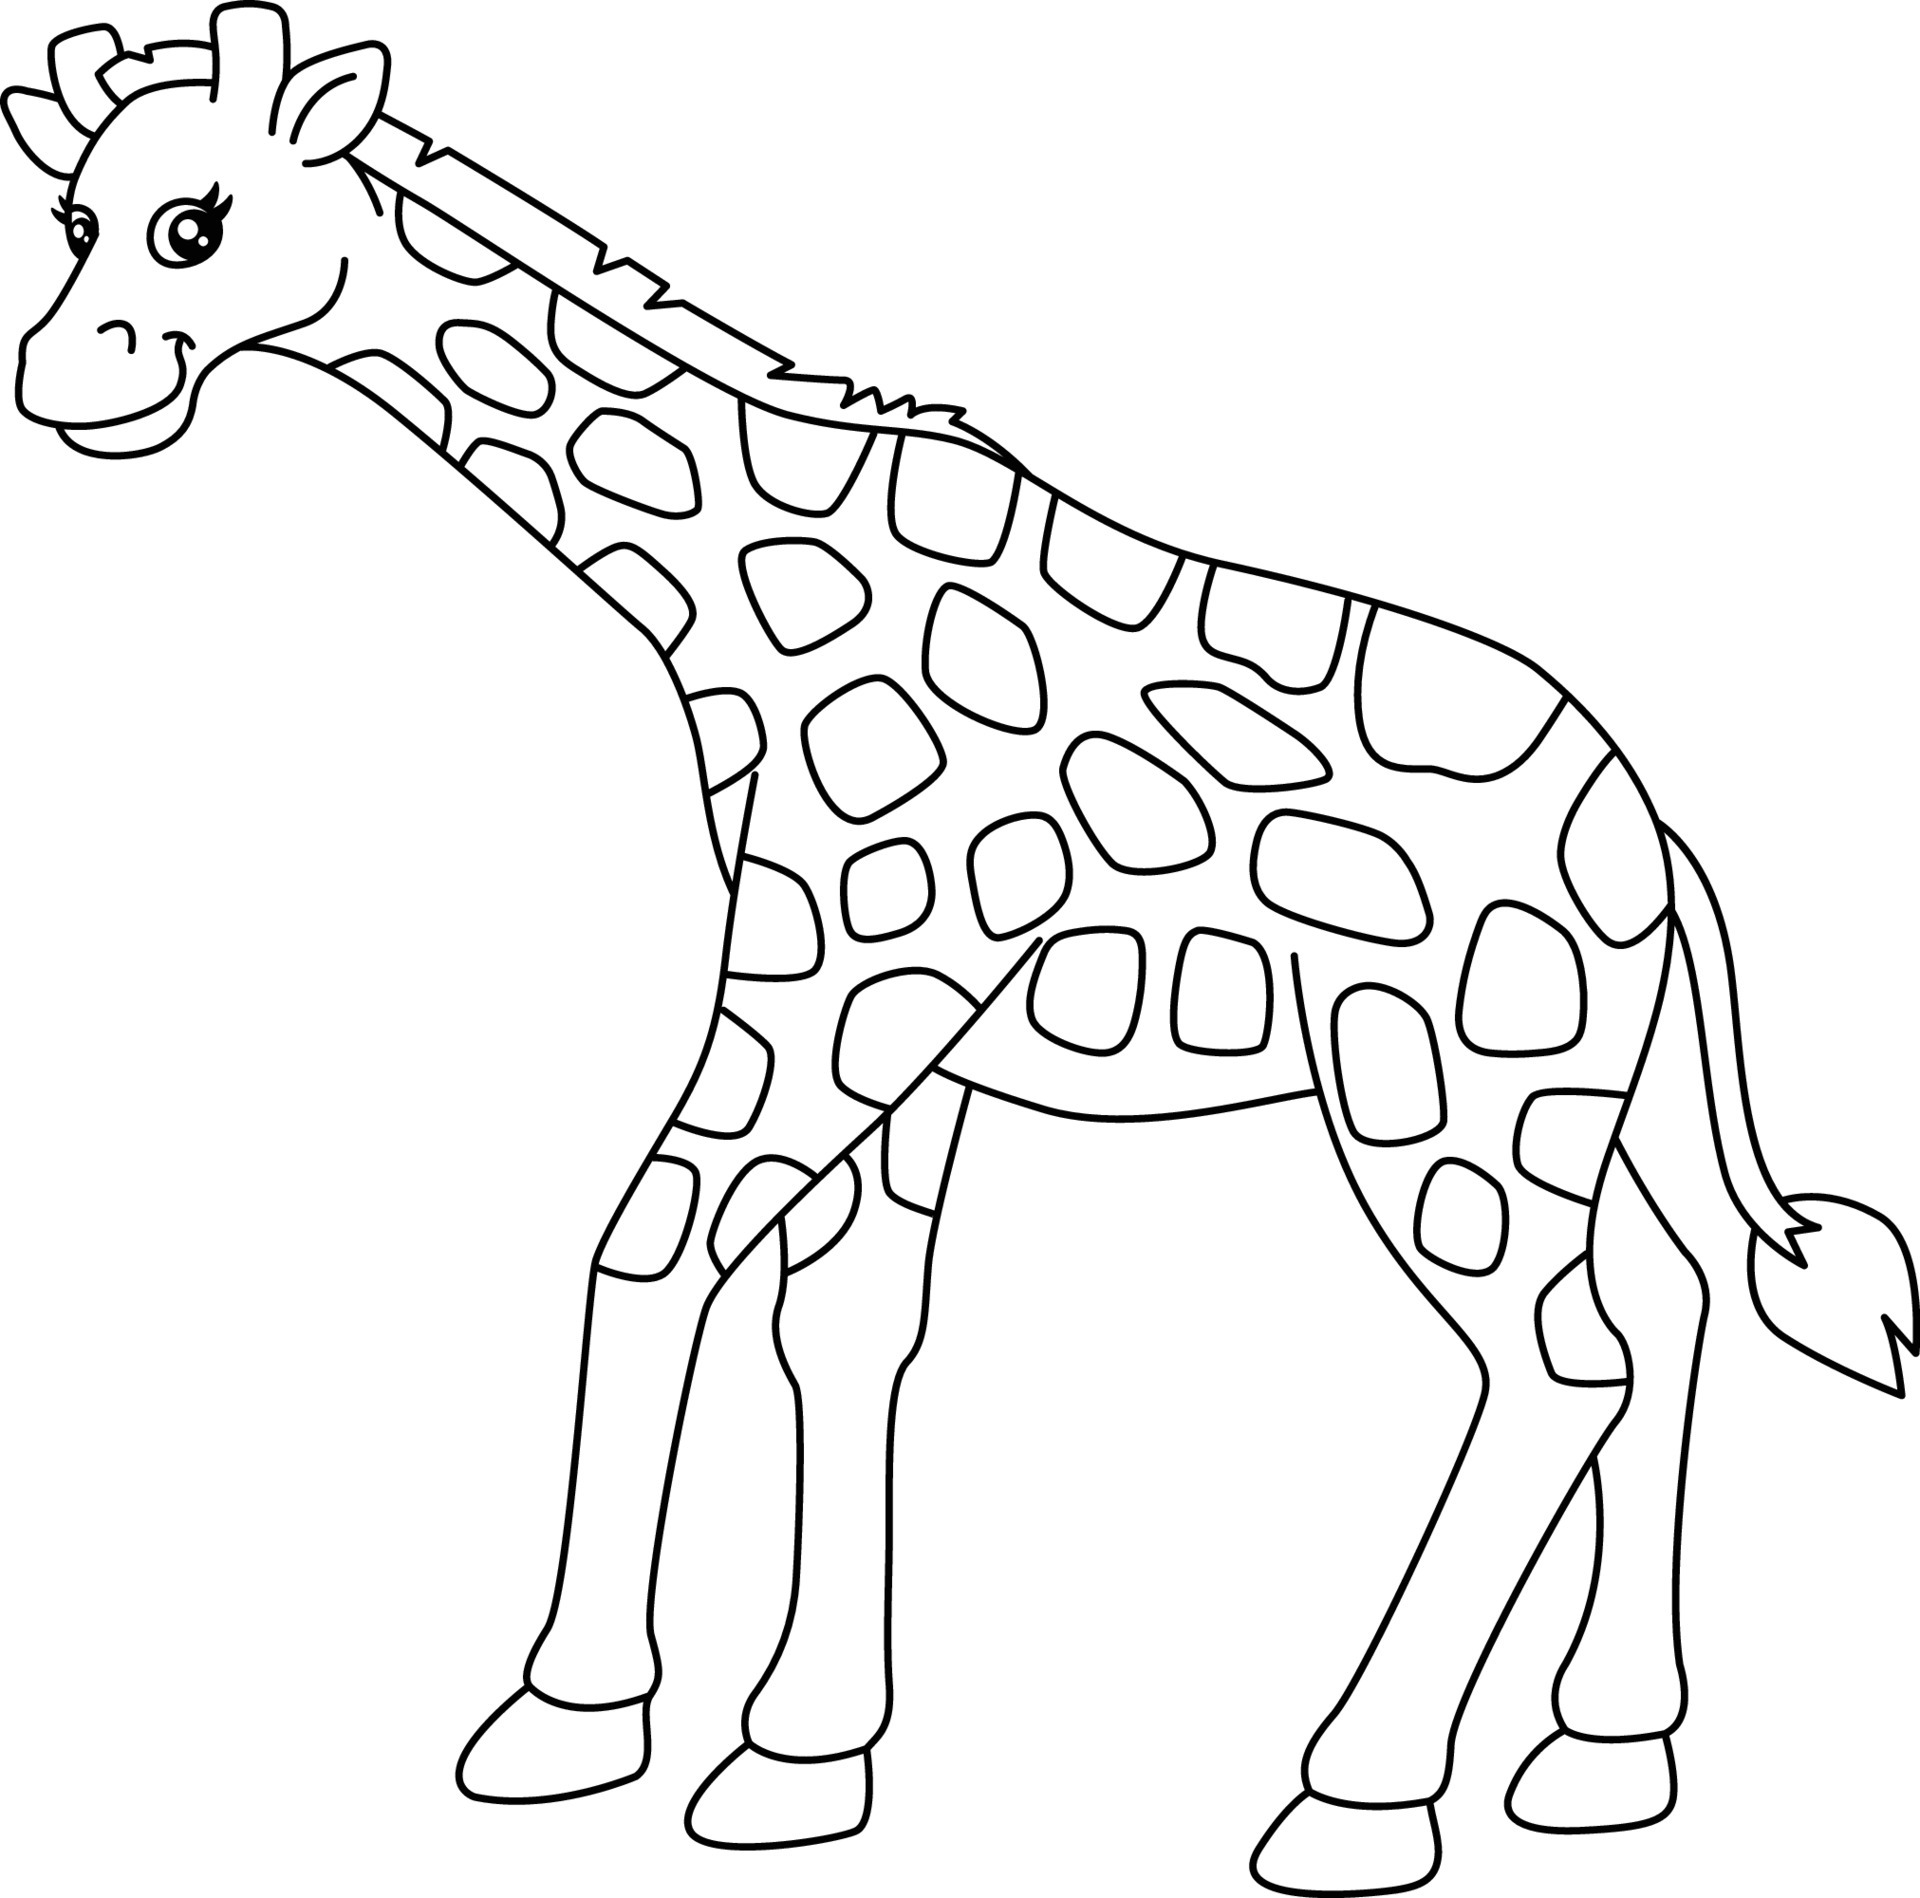 Giraffe Coloring Book Vector Art, Icons, and Graphics for Free ...